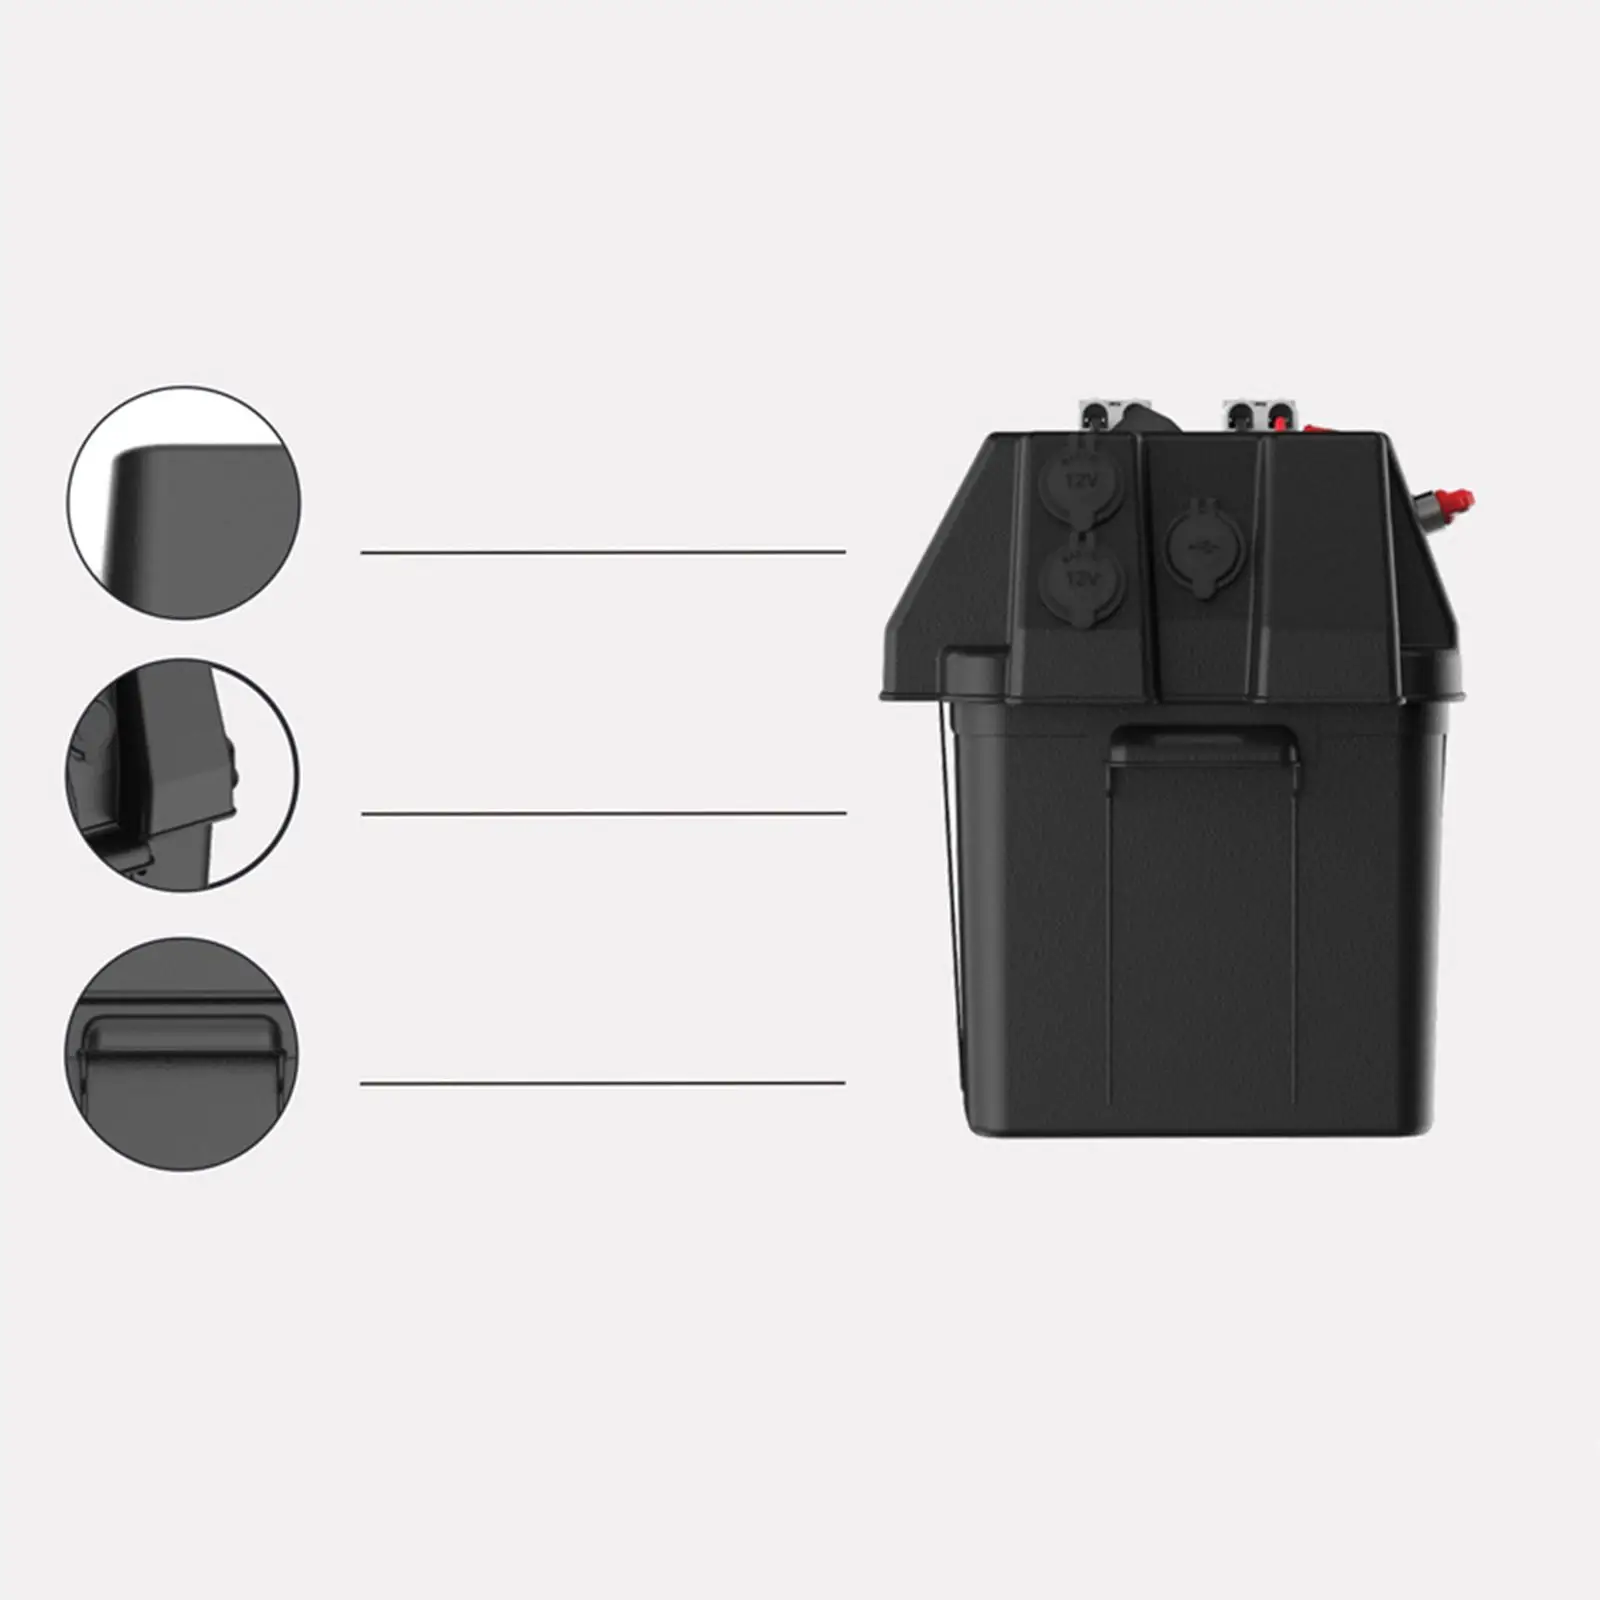 Fast Charging with Handle USB Ports Waterproof Battery Box Emergency Power Storage for Outdoor Camping Travel Trailer Boat